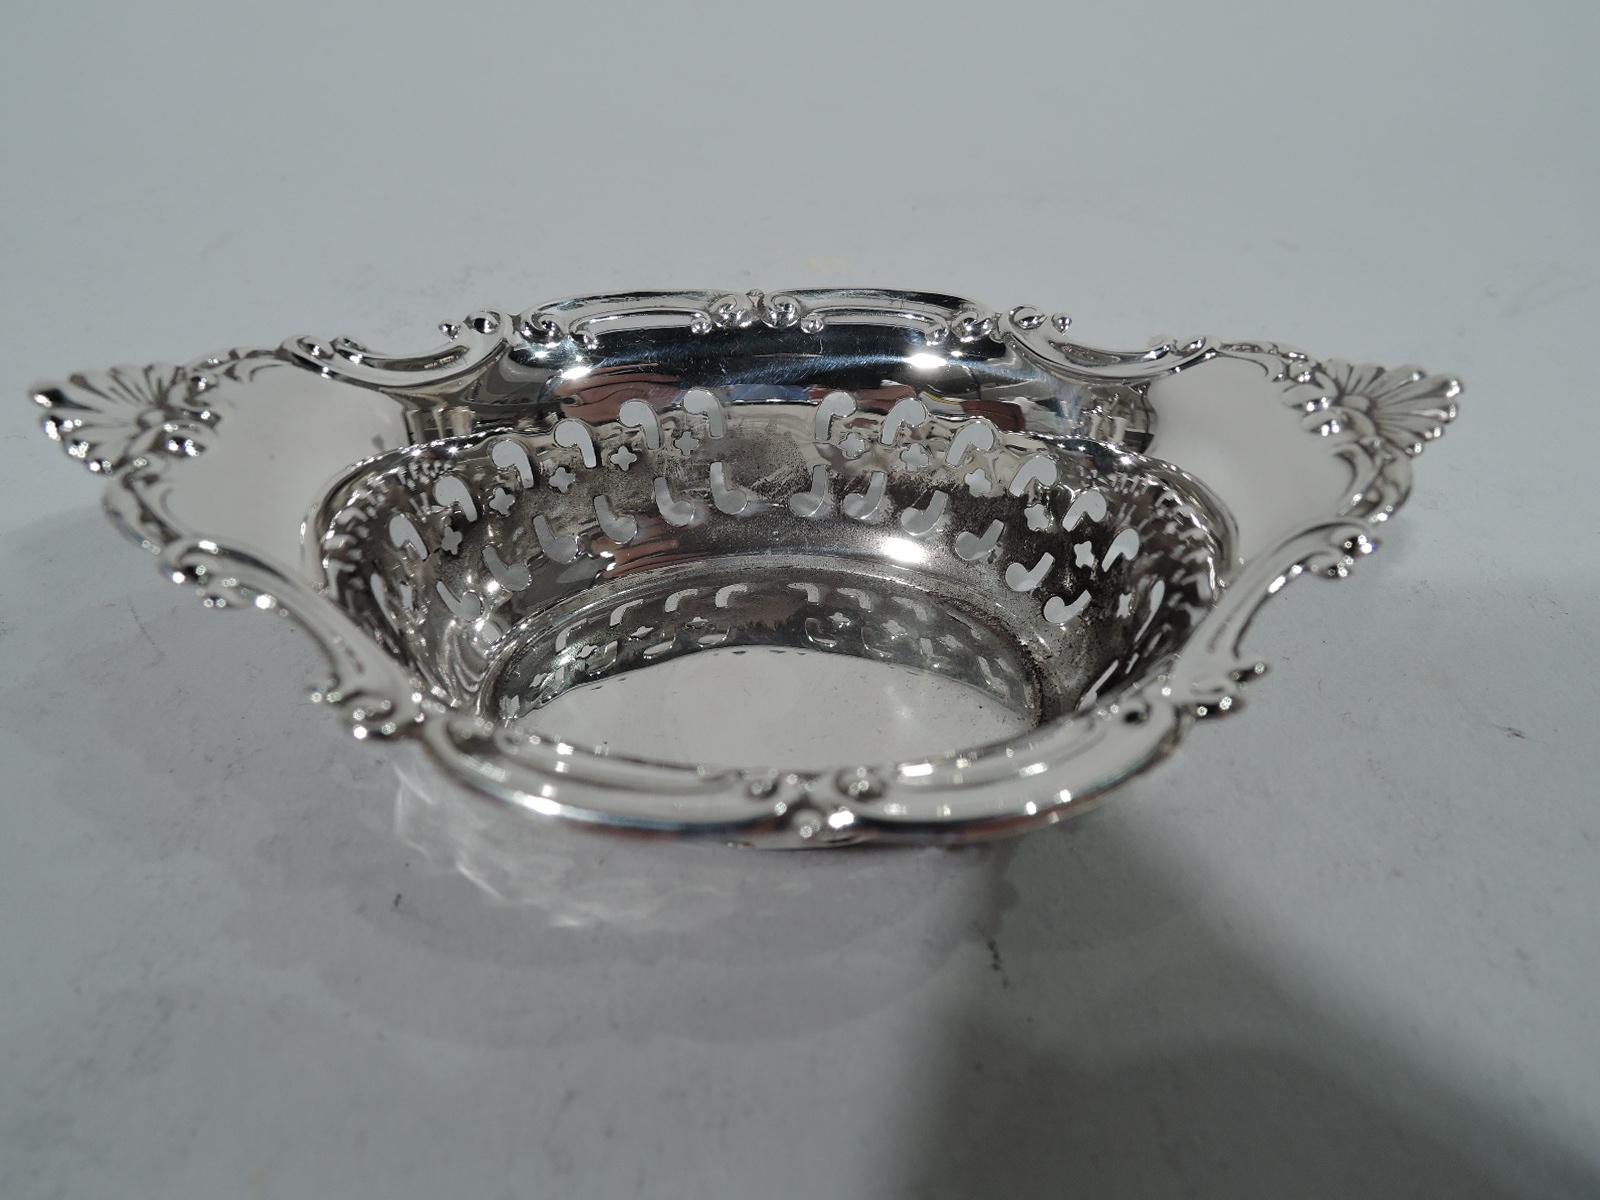 Set of 4 classical sterling silver nut dishes. Made by Gorham in Providence, circa 1920. Each: Solid oval well, pierced sides, and scrolled rim with scallop shells at ends. Hallmark includes no. 4780. Very good condition.
Dimensions: H 1 1/8 x W 3